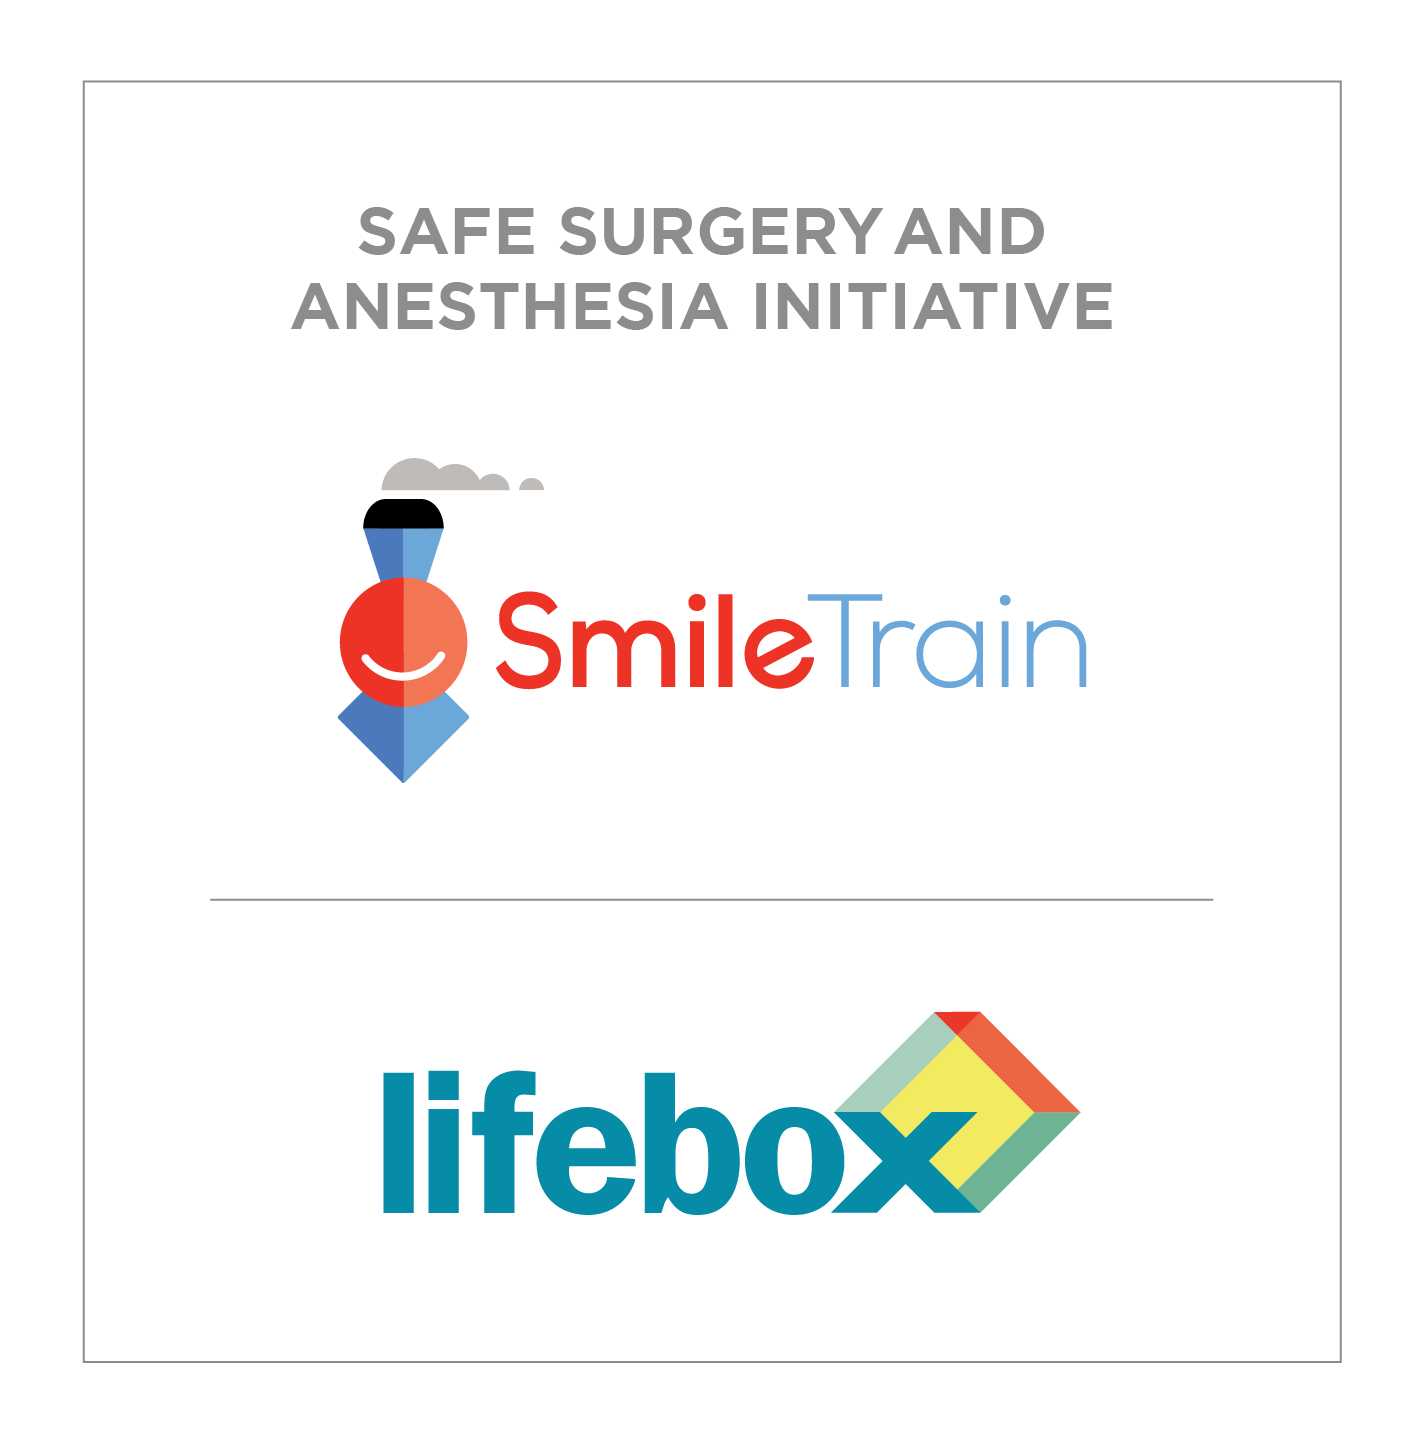 Smile Train-Lifebox Safe Surgery and Anesthesia Initiative